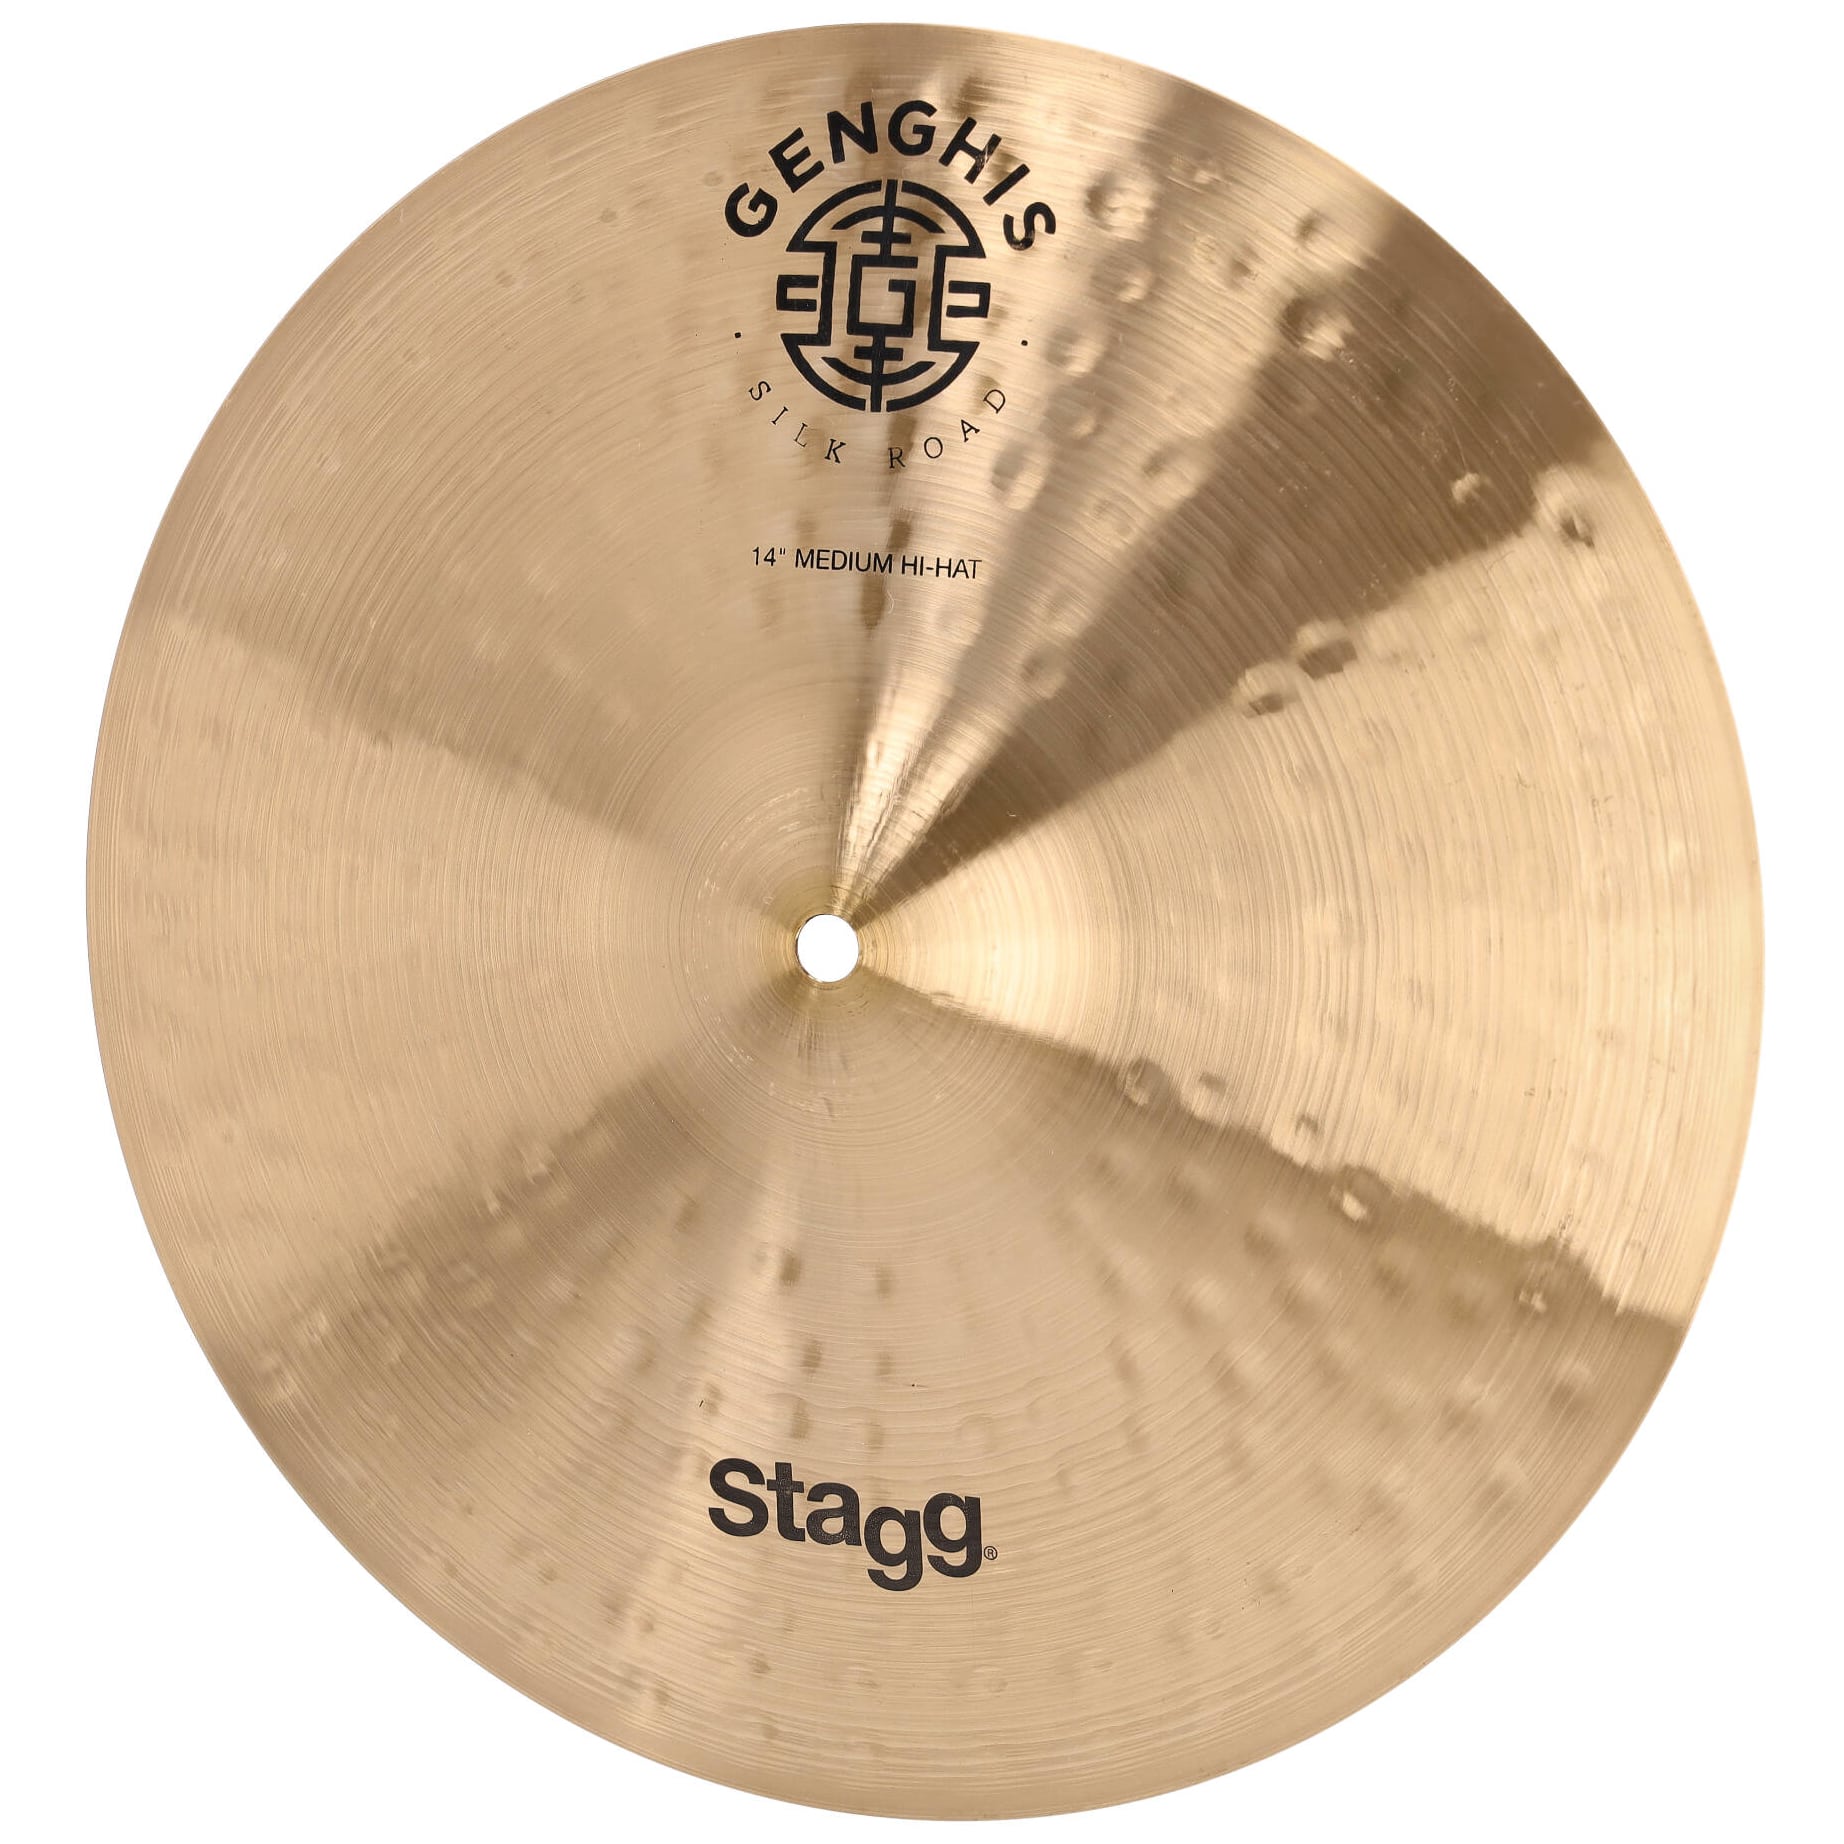 Stagg Genghis Classic Series Hi-Hat - 14 Zoll